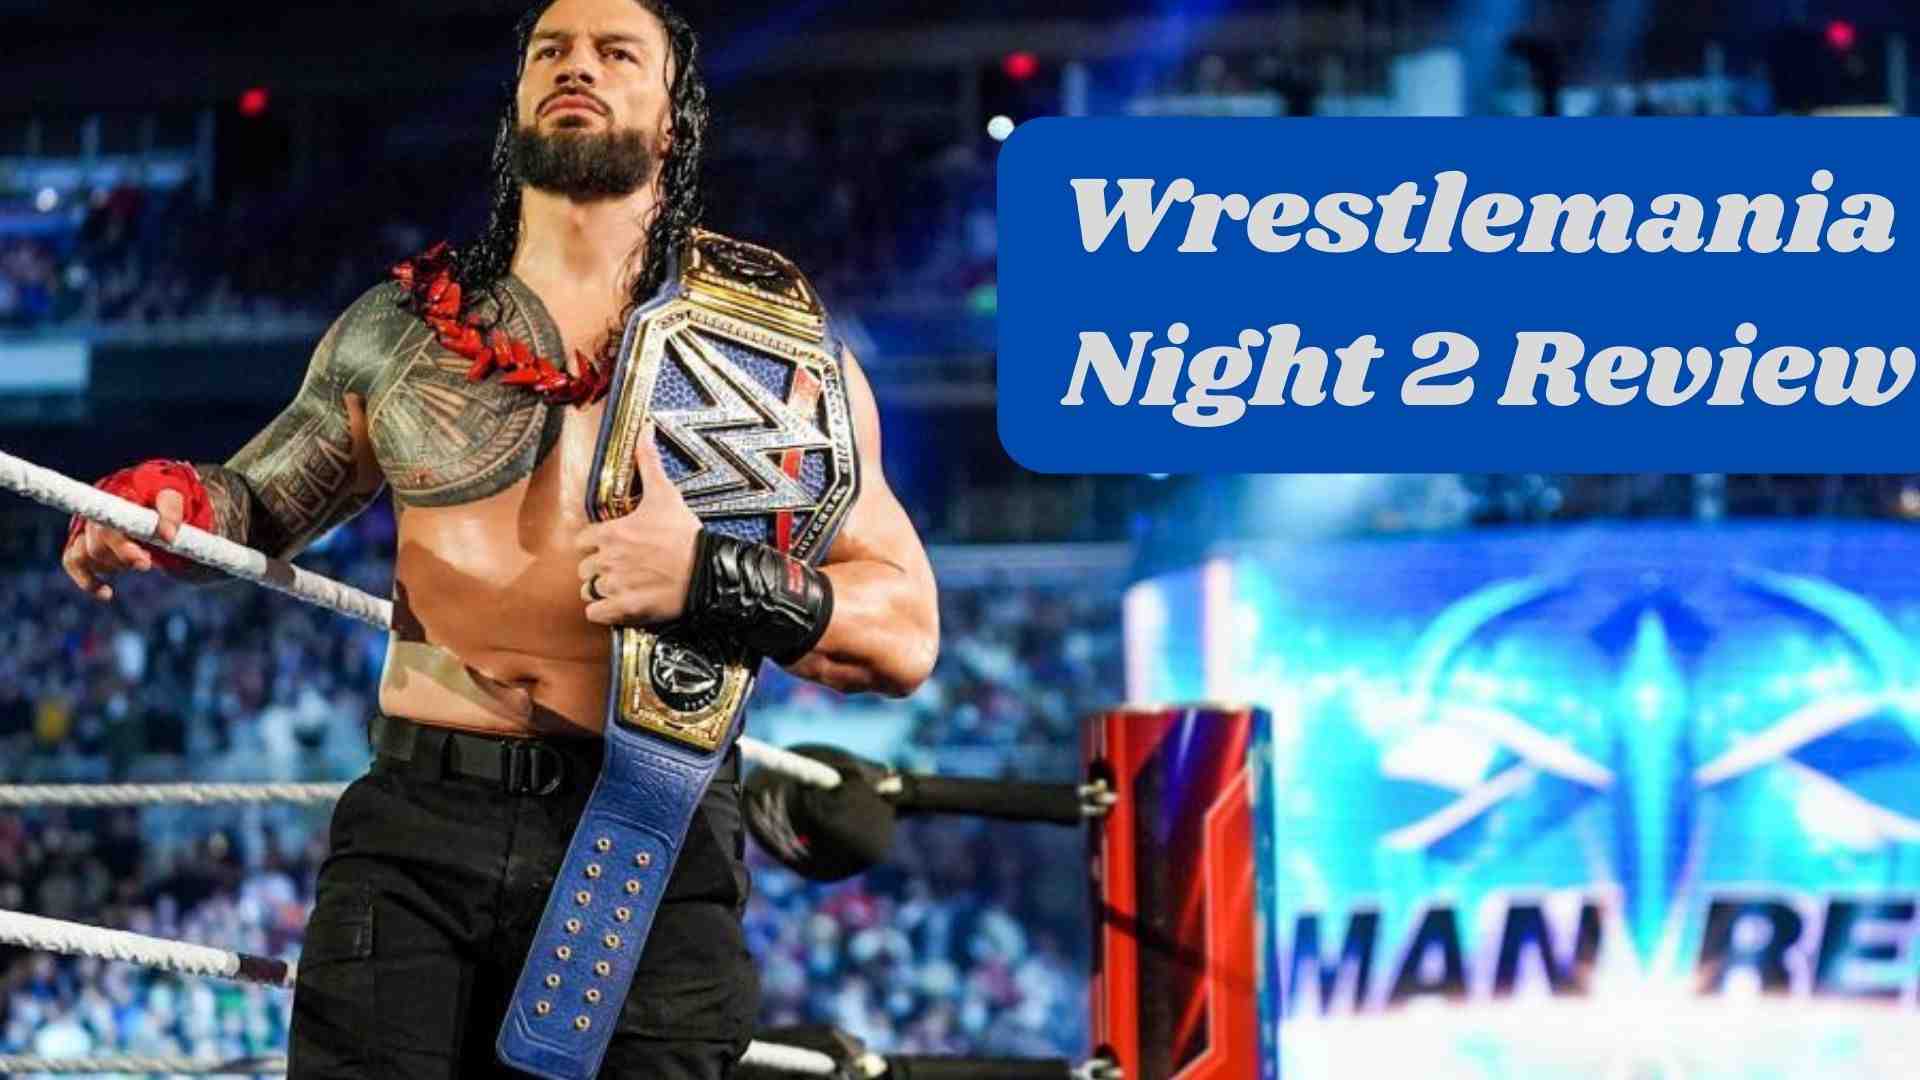 Wrestlemania Night 2 Review Wallpaper and images